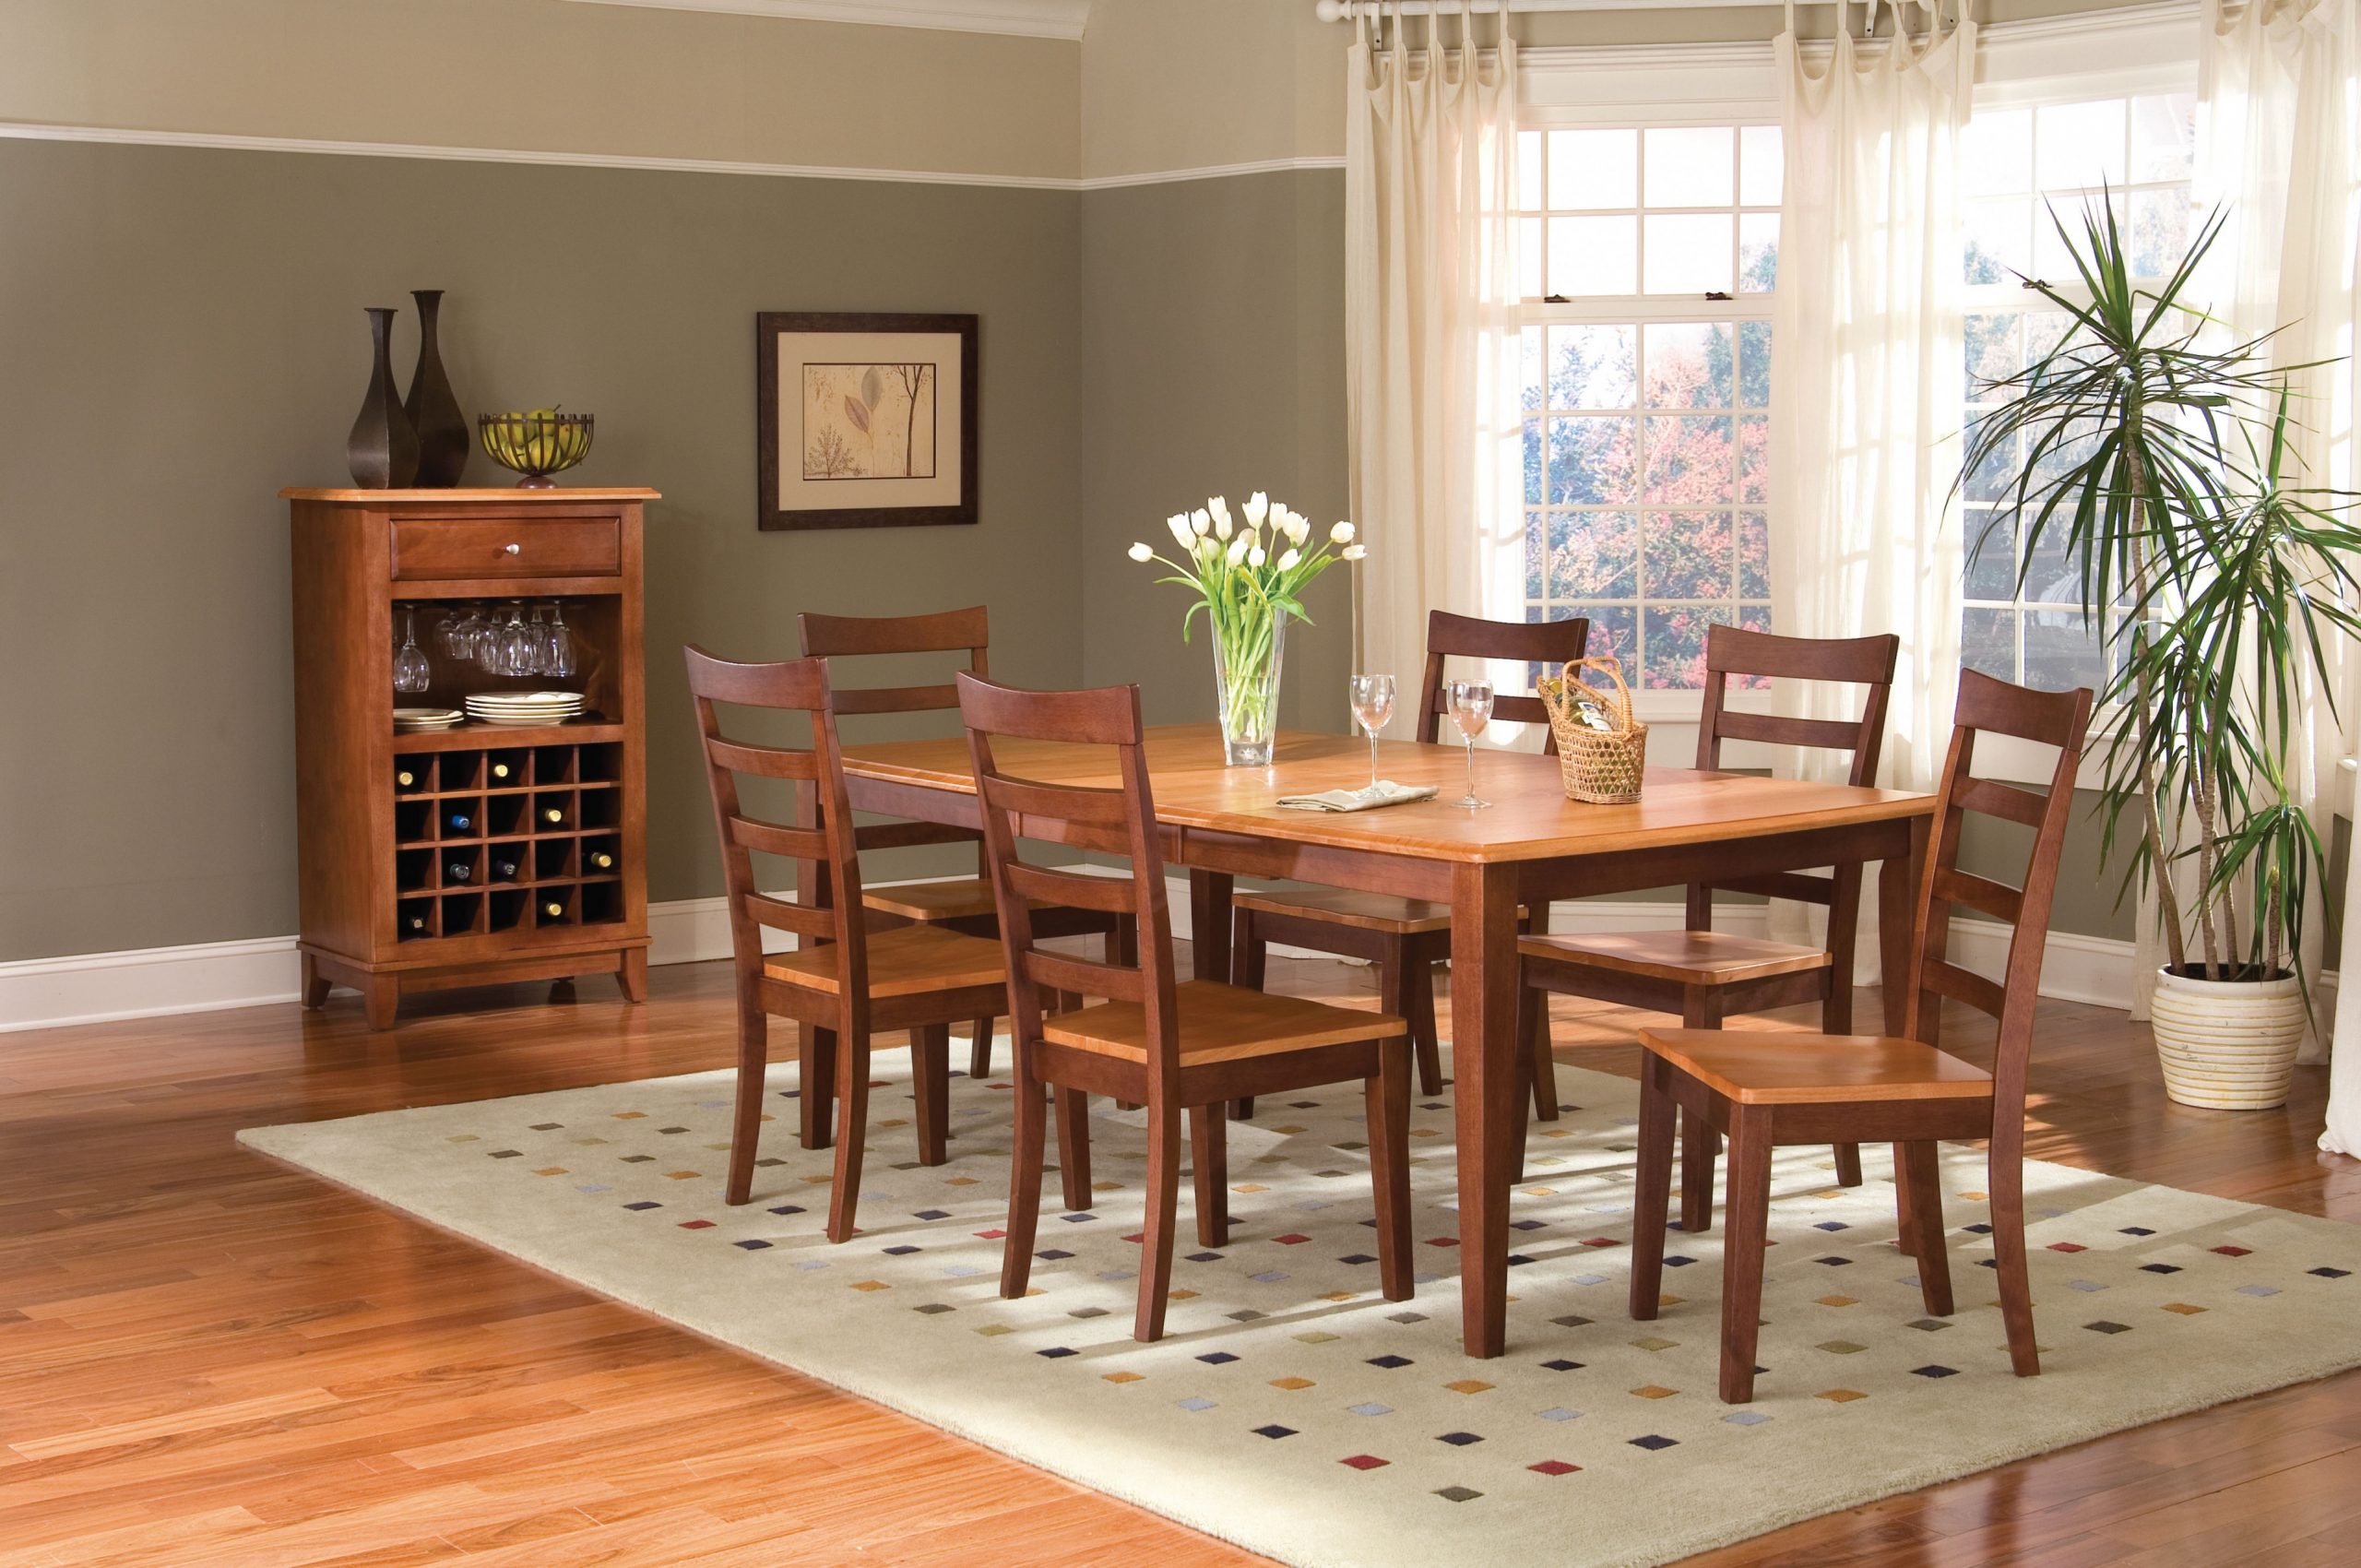 Decor Pub Dining Table Sets Havertys Dining Room Home Home for dimensions 3836 X 2548